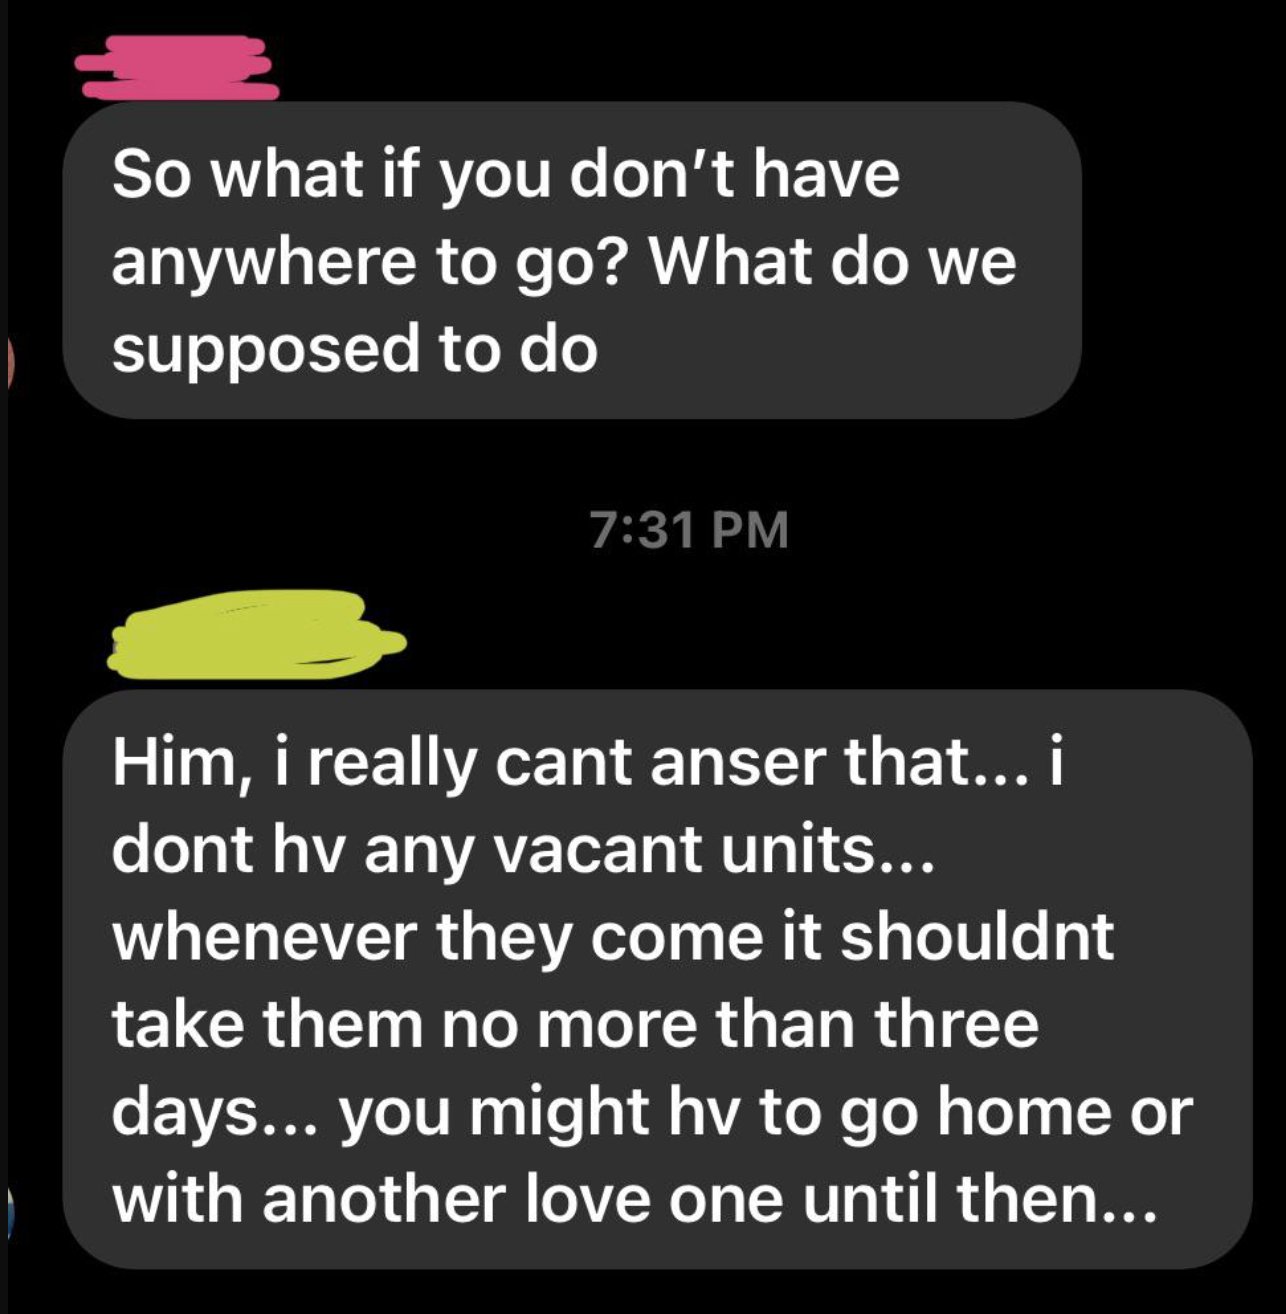 Tenant asks where they&#x27;re supposed to stay, and landlord says they can&#x27;t really answer as they don&#x27;t have any vacant units and it shouldn&#x27;t take them more than 3 days